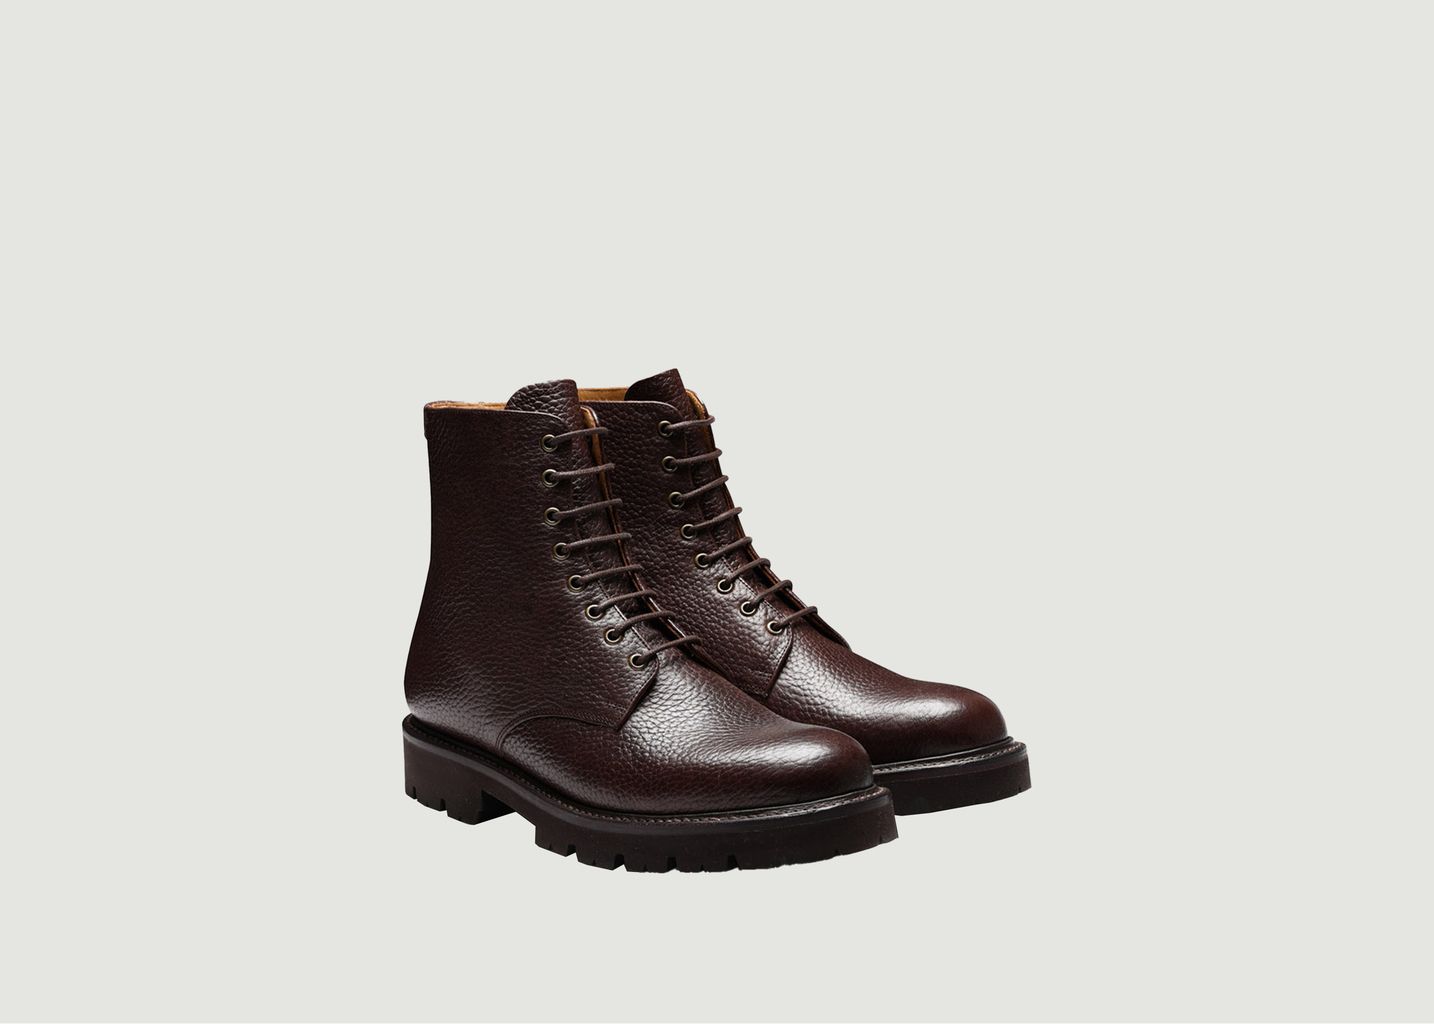 Hadley boots in hammered calf leather - Grenson